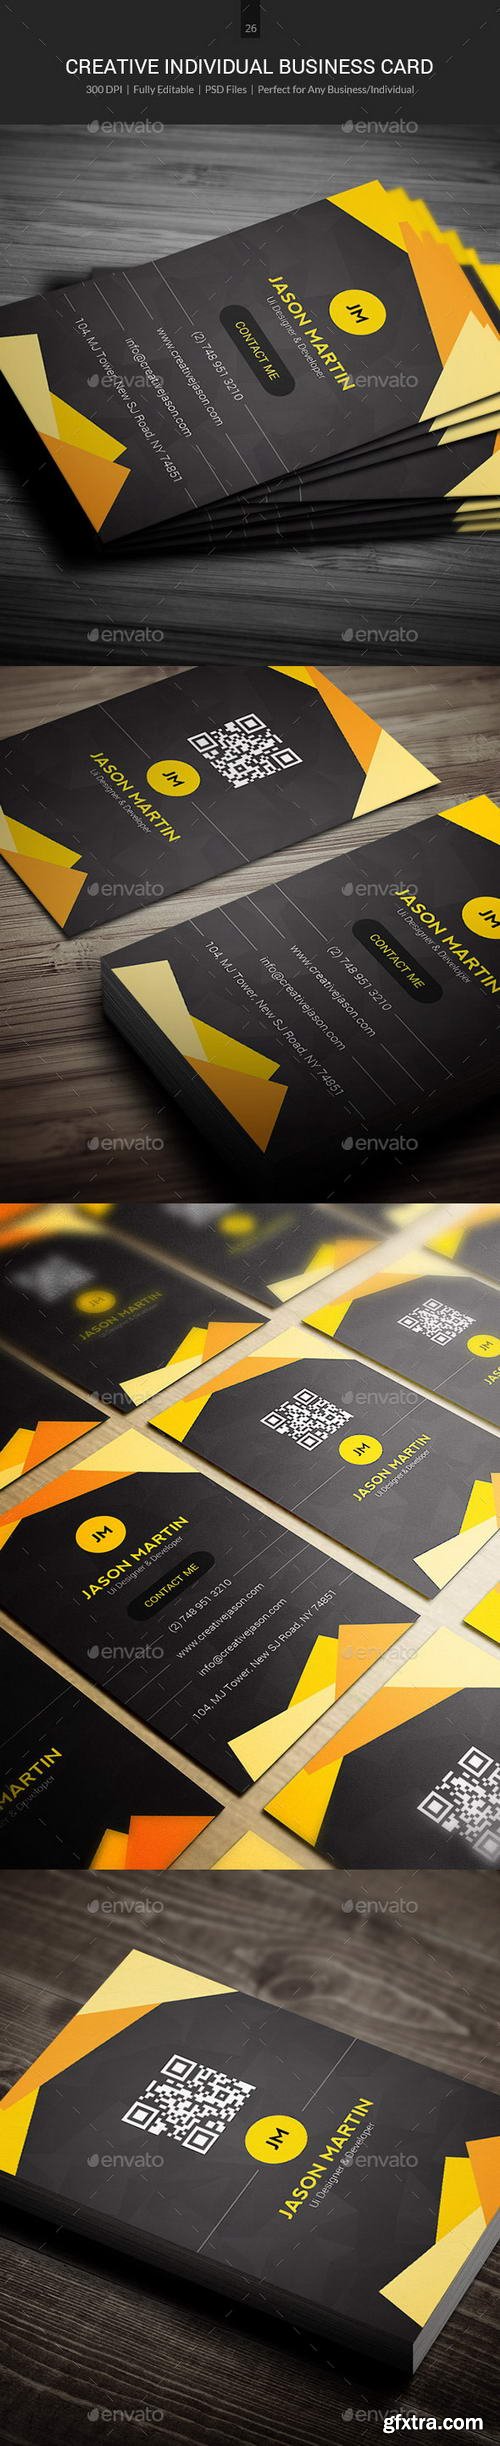 GraphicRiver - Creative Individual Business Card - 26 11252944